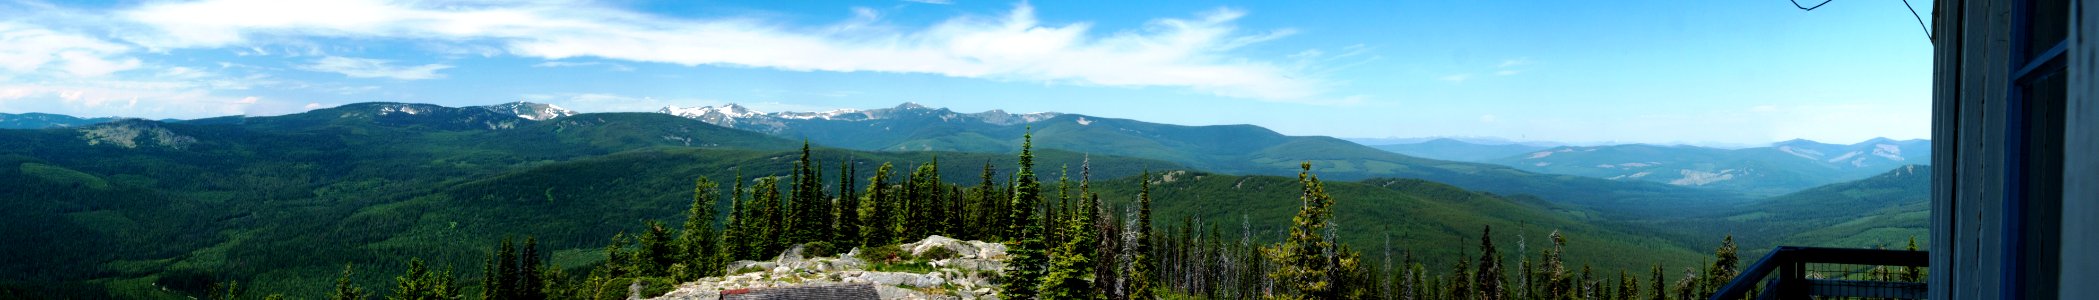 Pacific Northwest Trail panorama - looking west at the Northwest Peaks from Garver Mountain fire lookout on the Kootenai National Forest photo